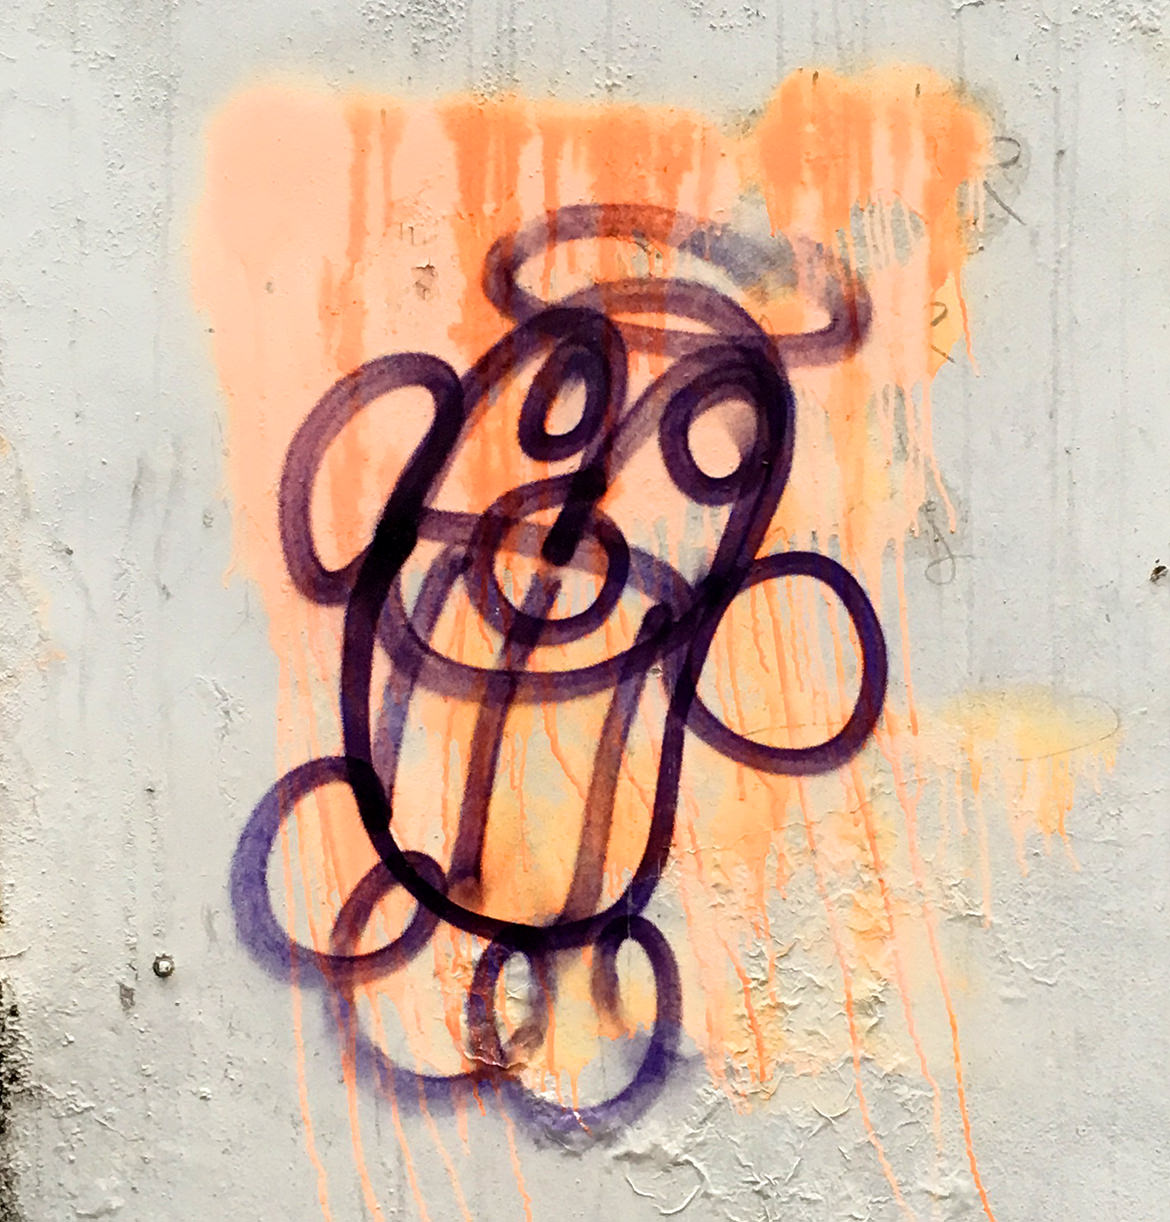 Grafitti of a happy smiling face with a halo above the head